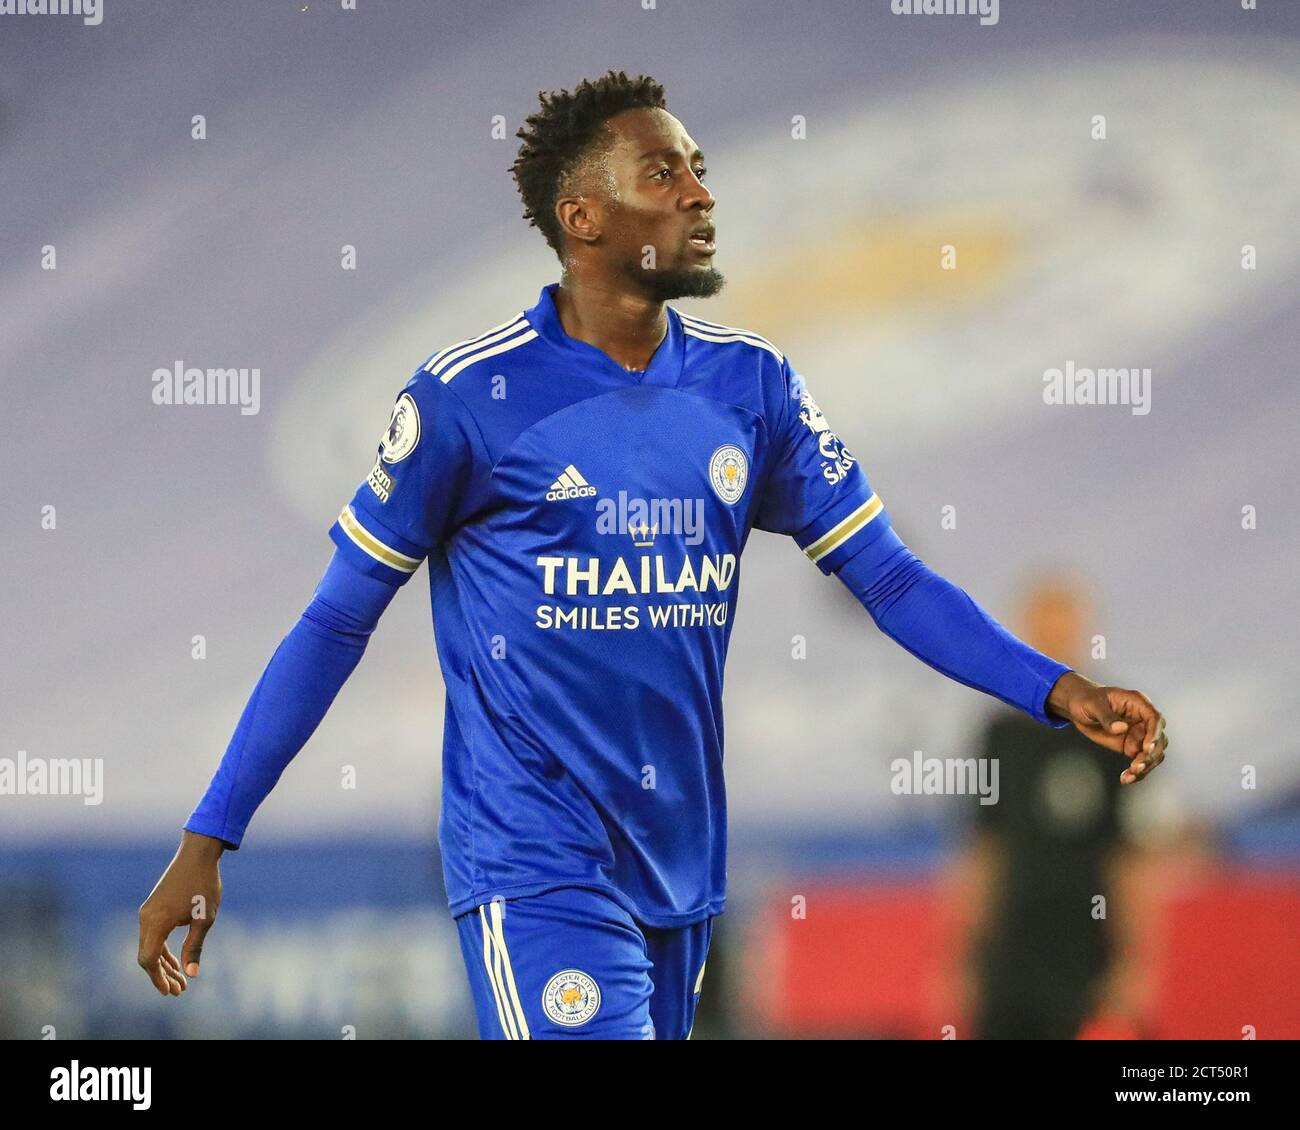 Wilfred Ndidi (25) of Leicester City during the game Stock Photo